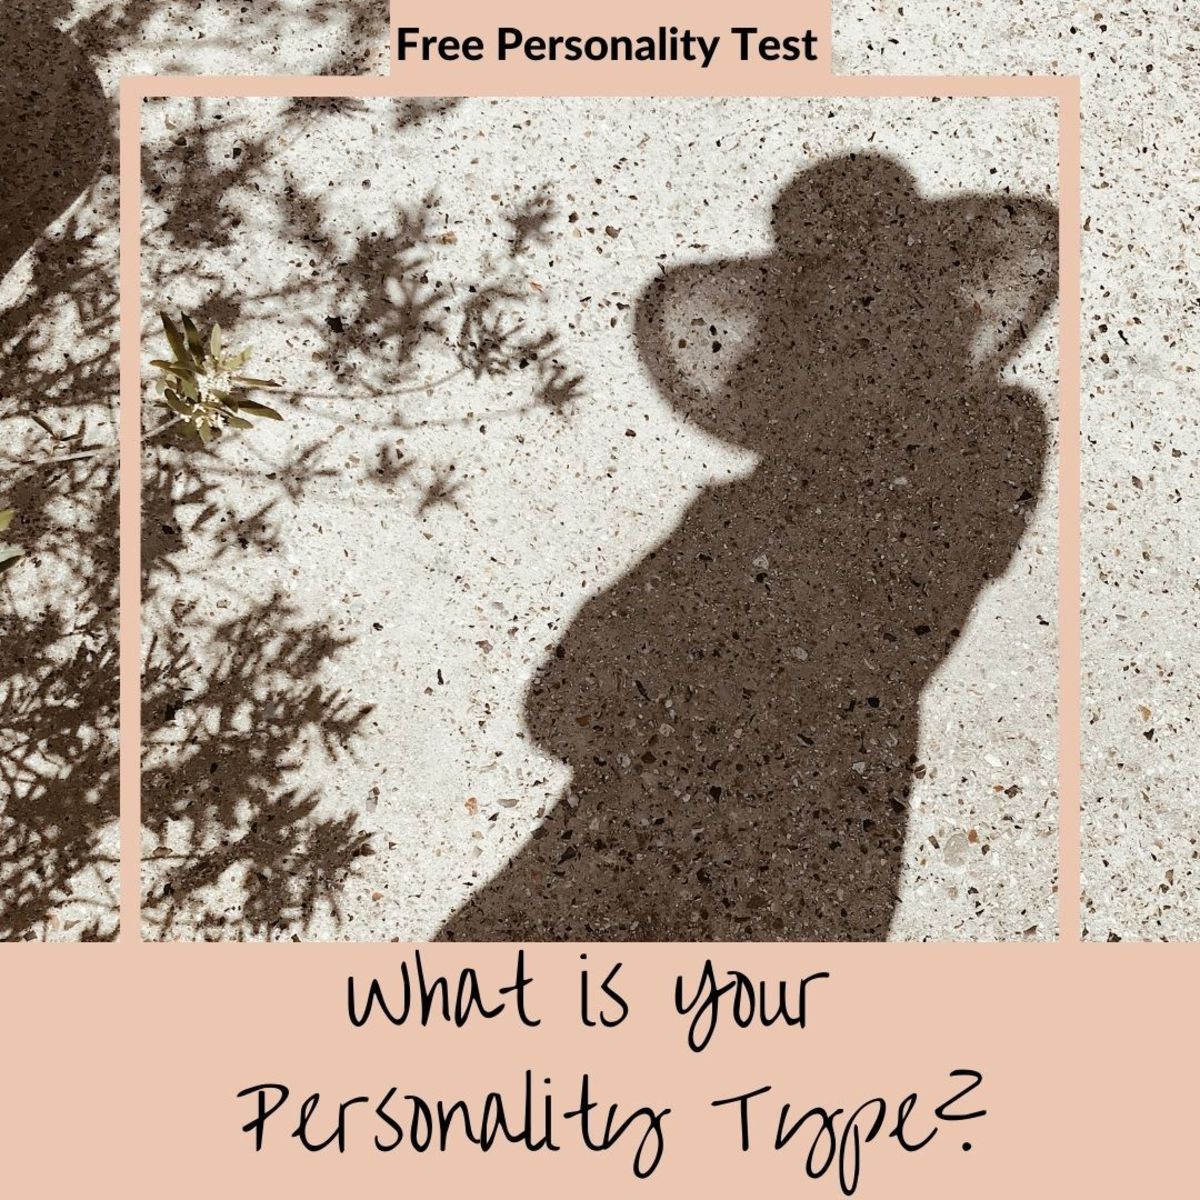 What is your personality type?